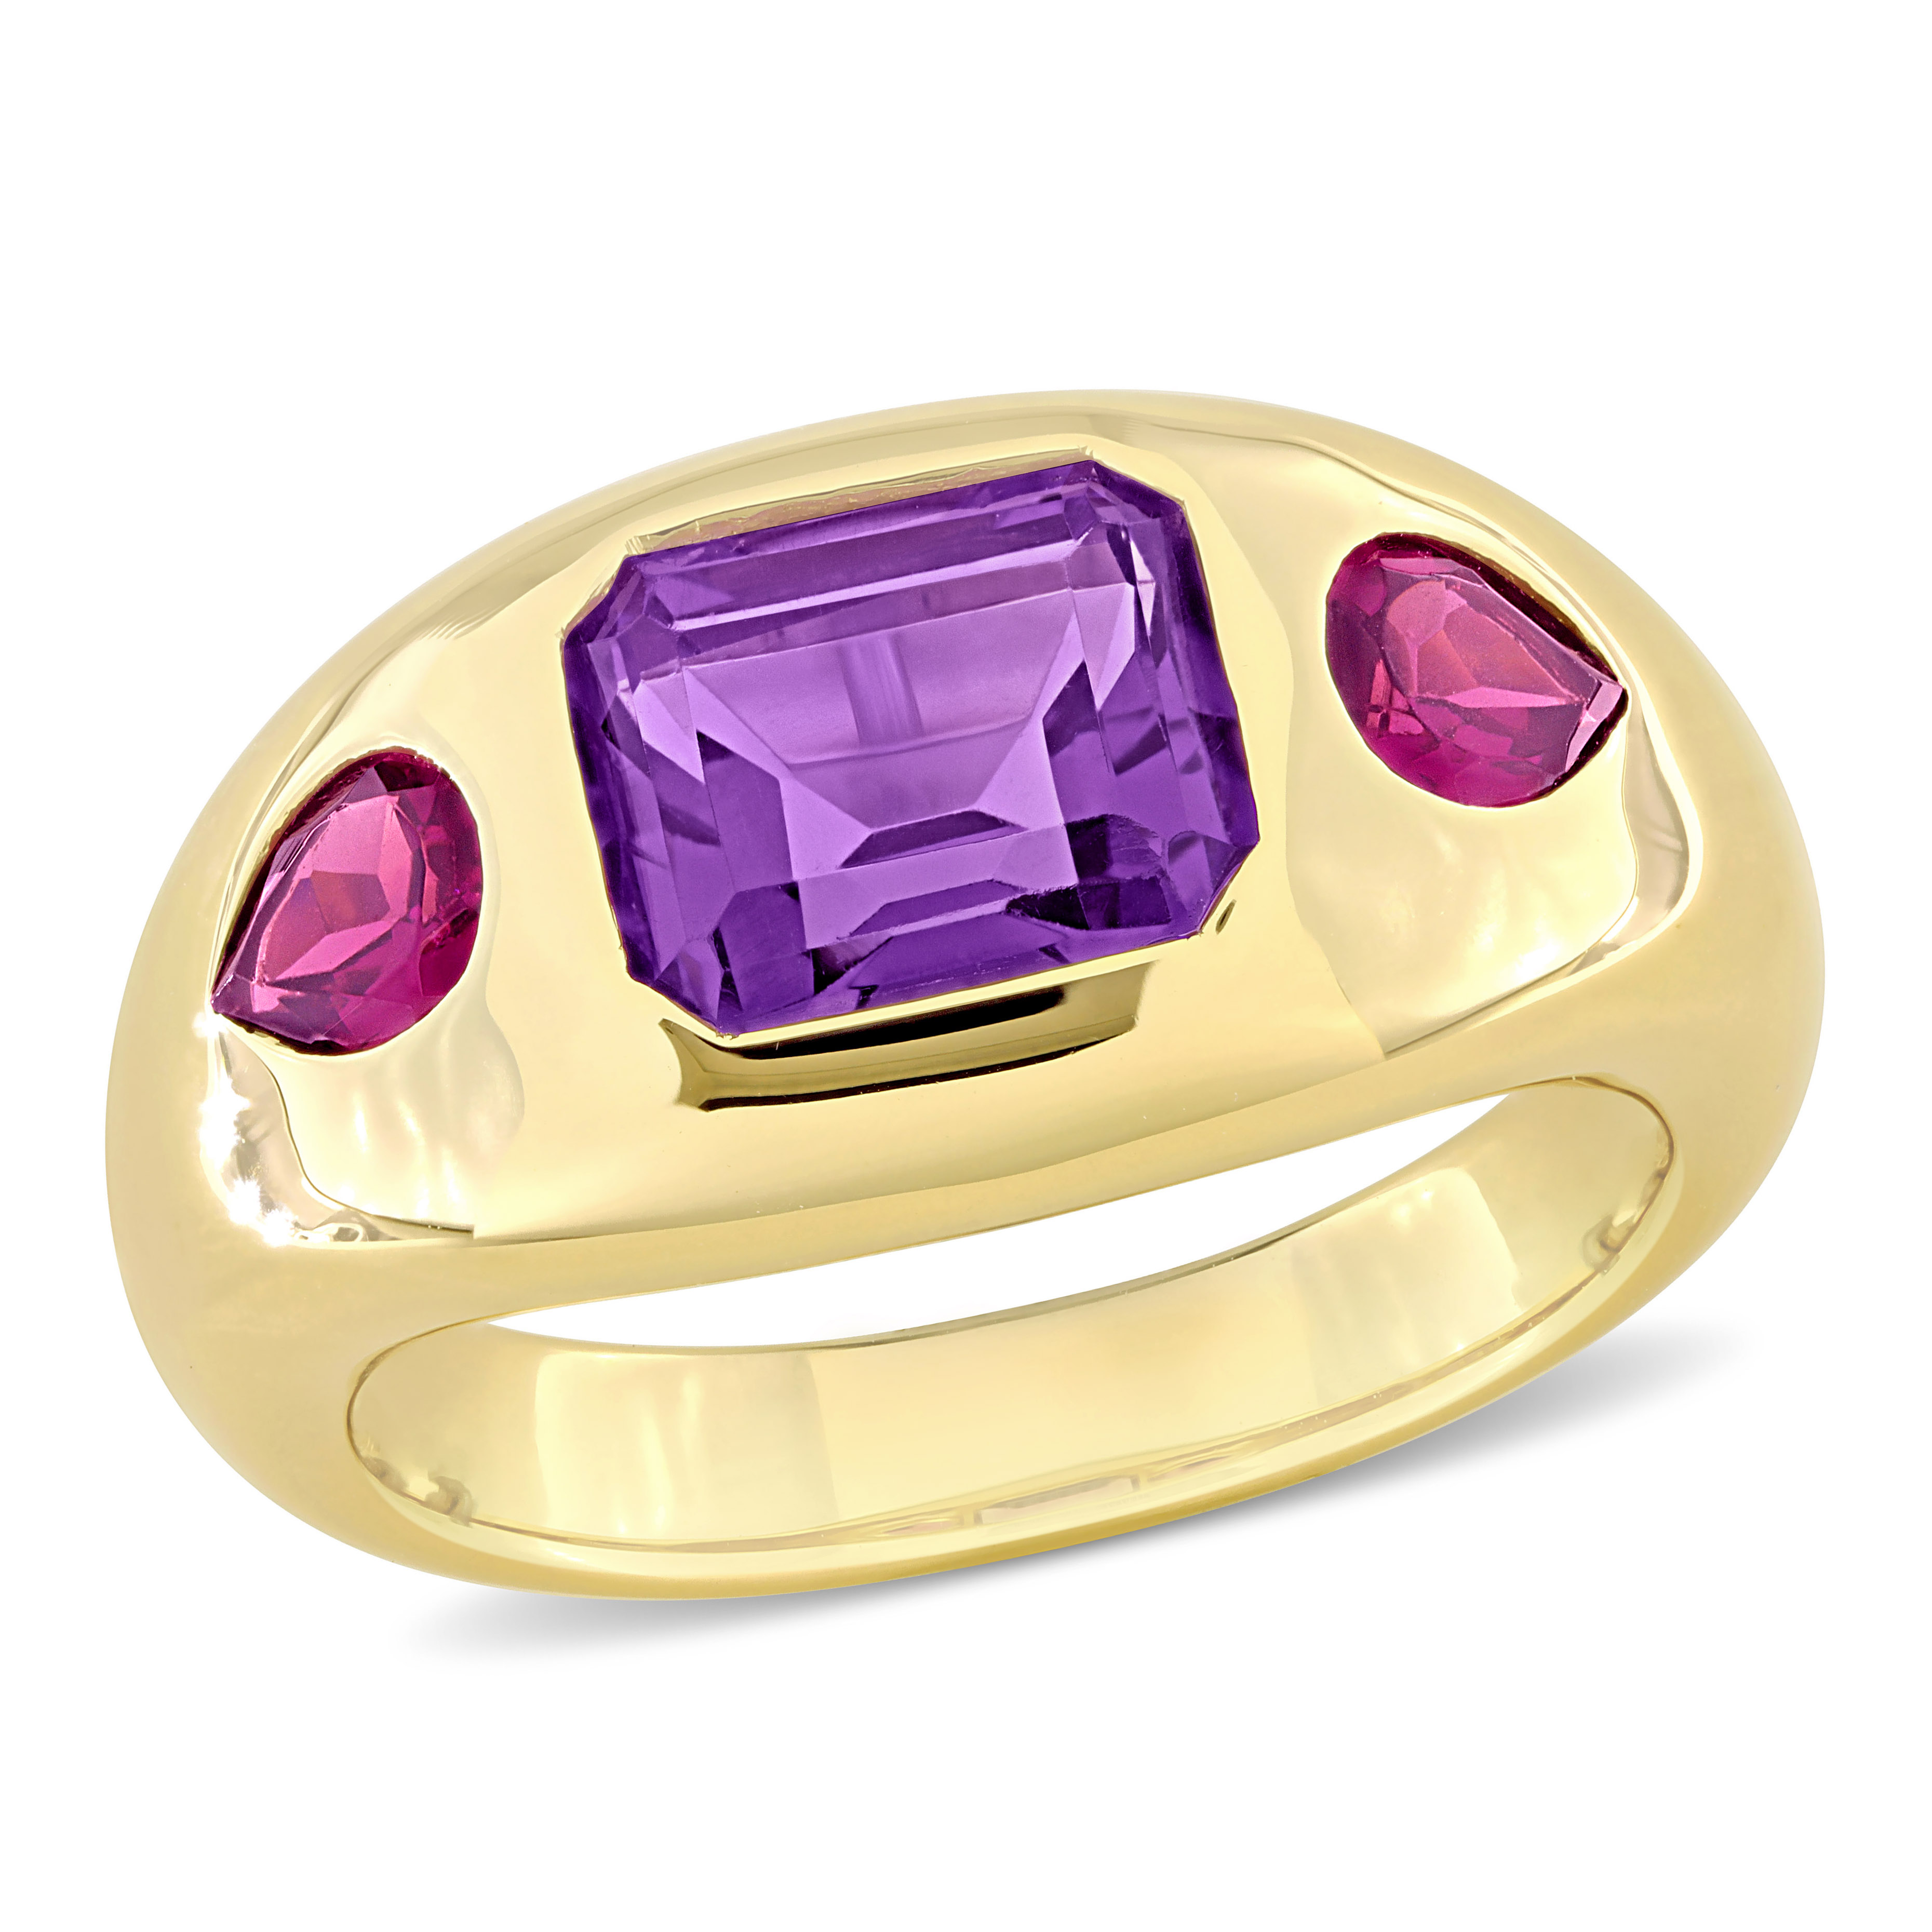 3 3/4 CT TGW Octagon Violet Spinel and Pear Shape Rhodolite 3-Stone Ring in 14k Yellow Gold